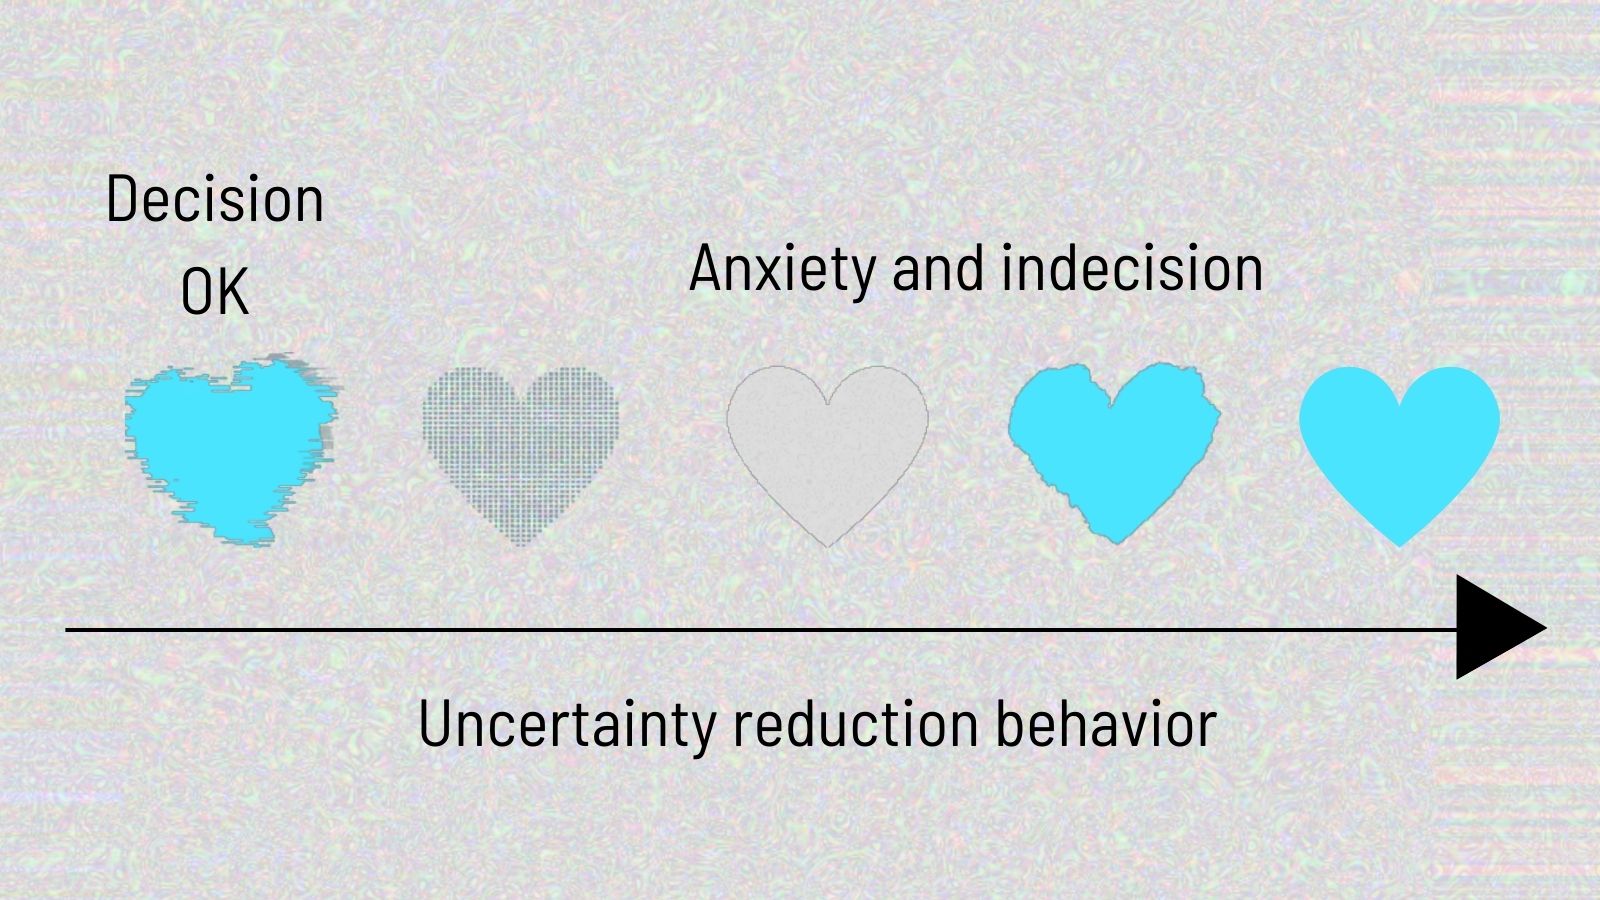 uncertainty reduction behavior causes anxiety and decision problems